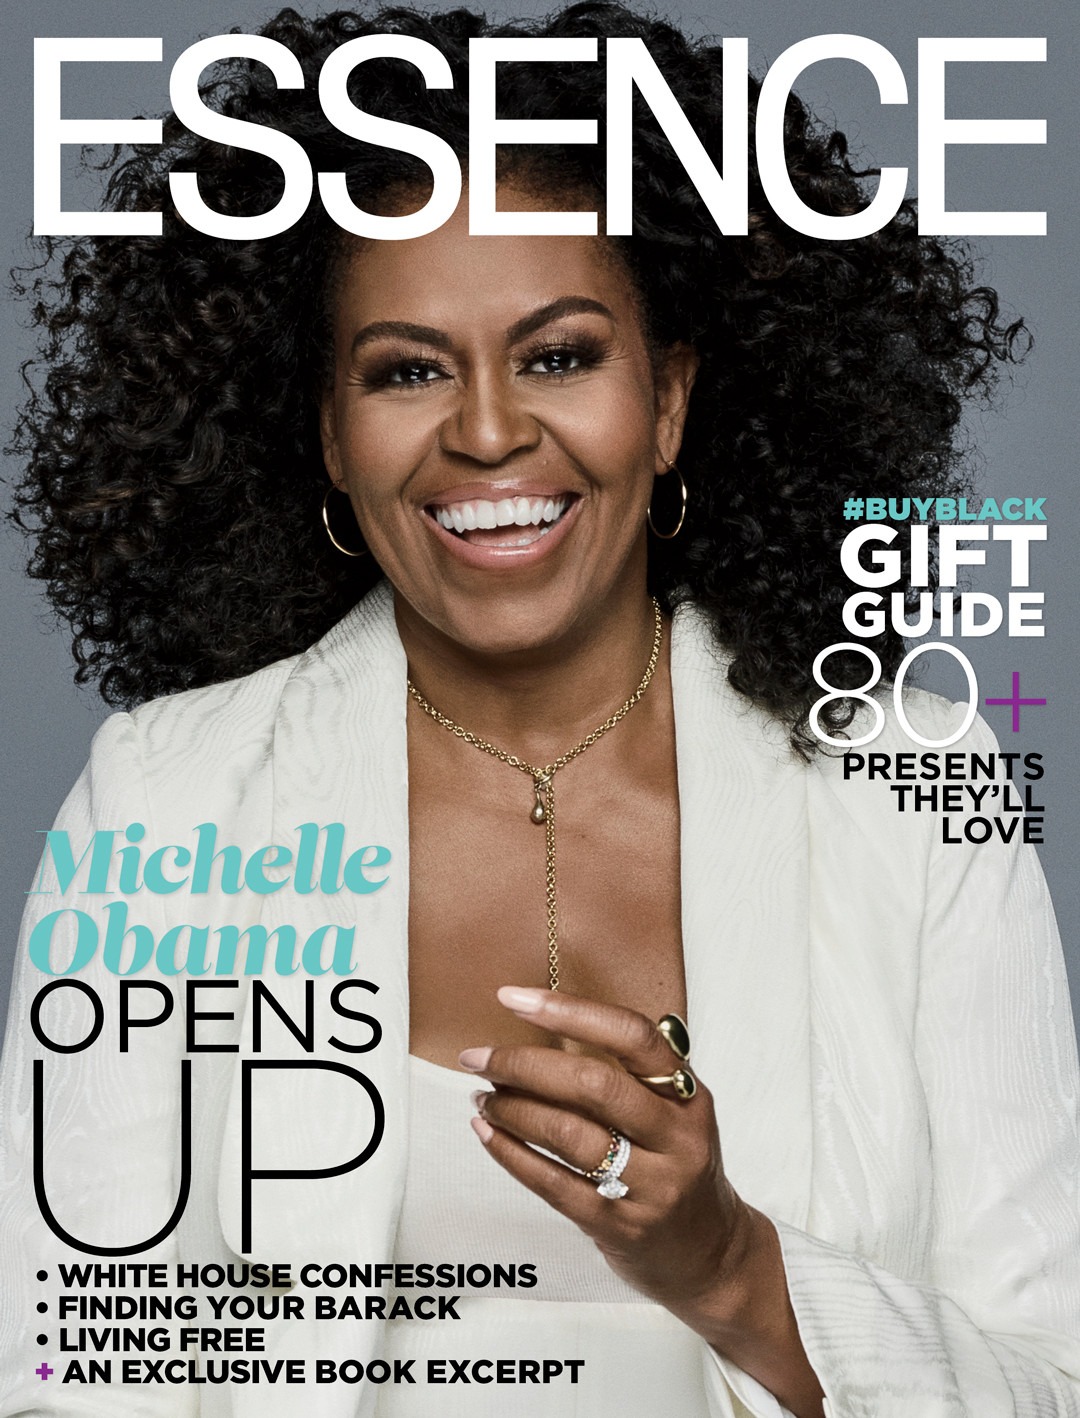 Michelle Obama Stuns With Curly Hair and Talks Getting Real With Women | E! News Australia